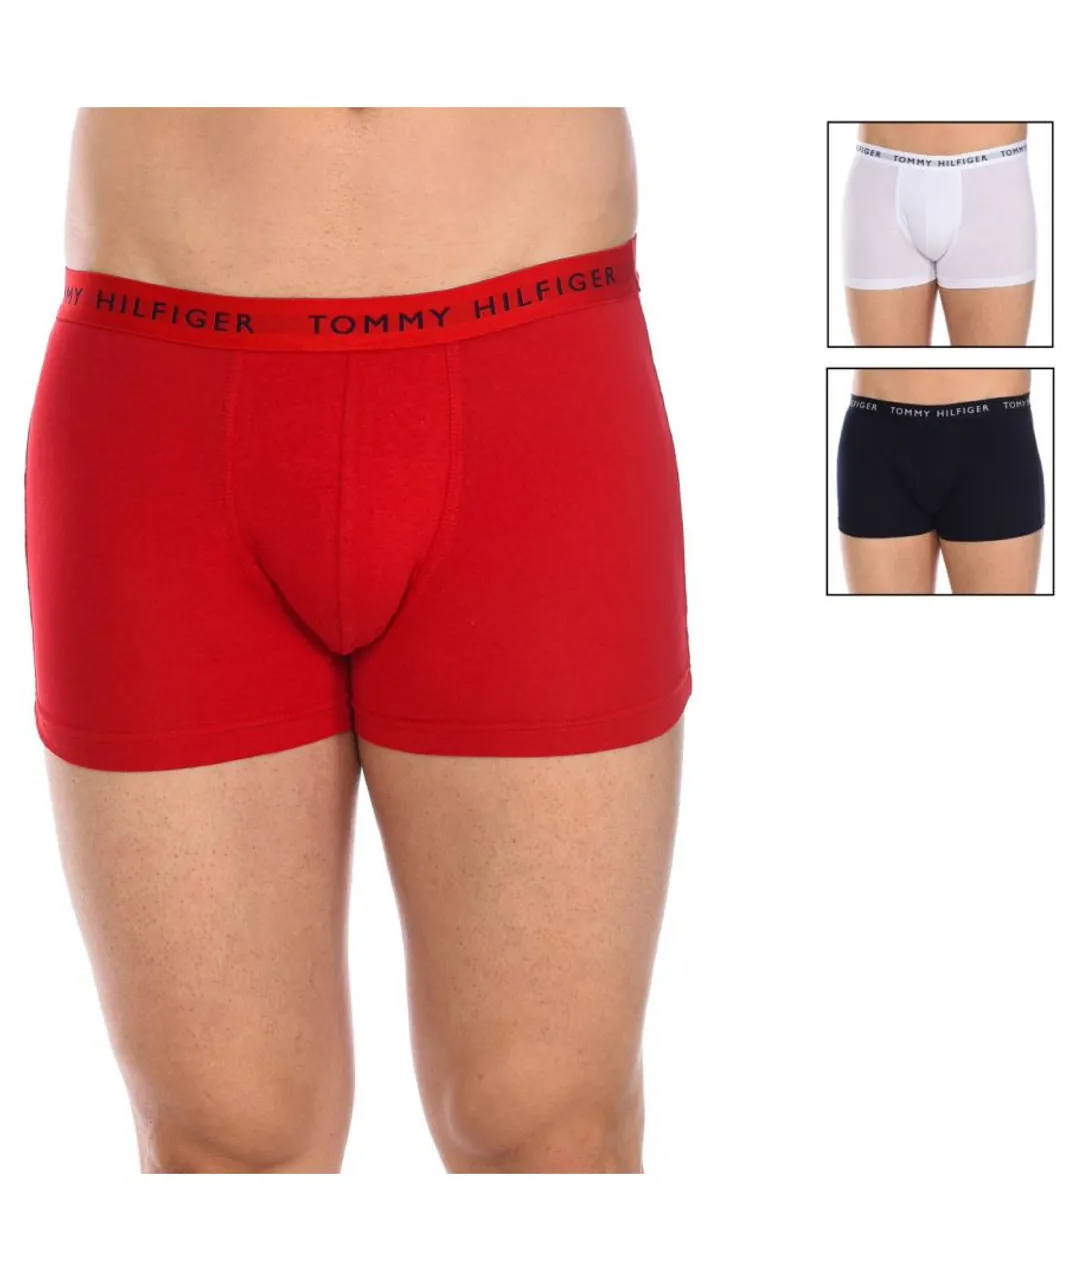 Tommy Hilfiger Recycled Essentials 3 Pack Mens Trunk - Red Cotton